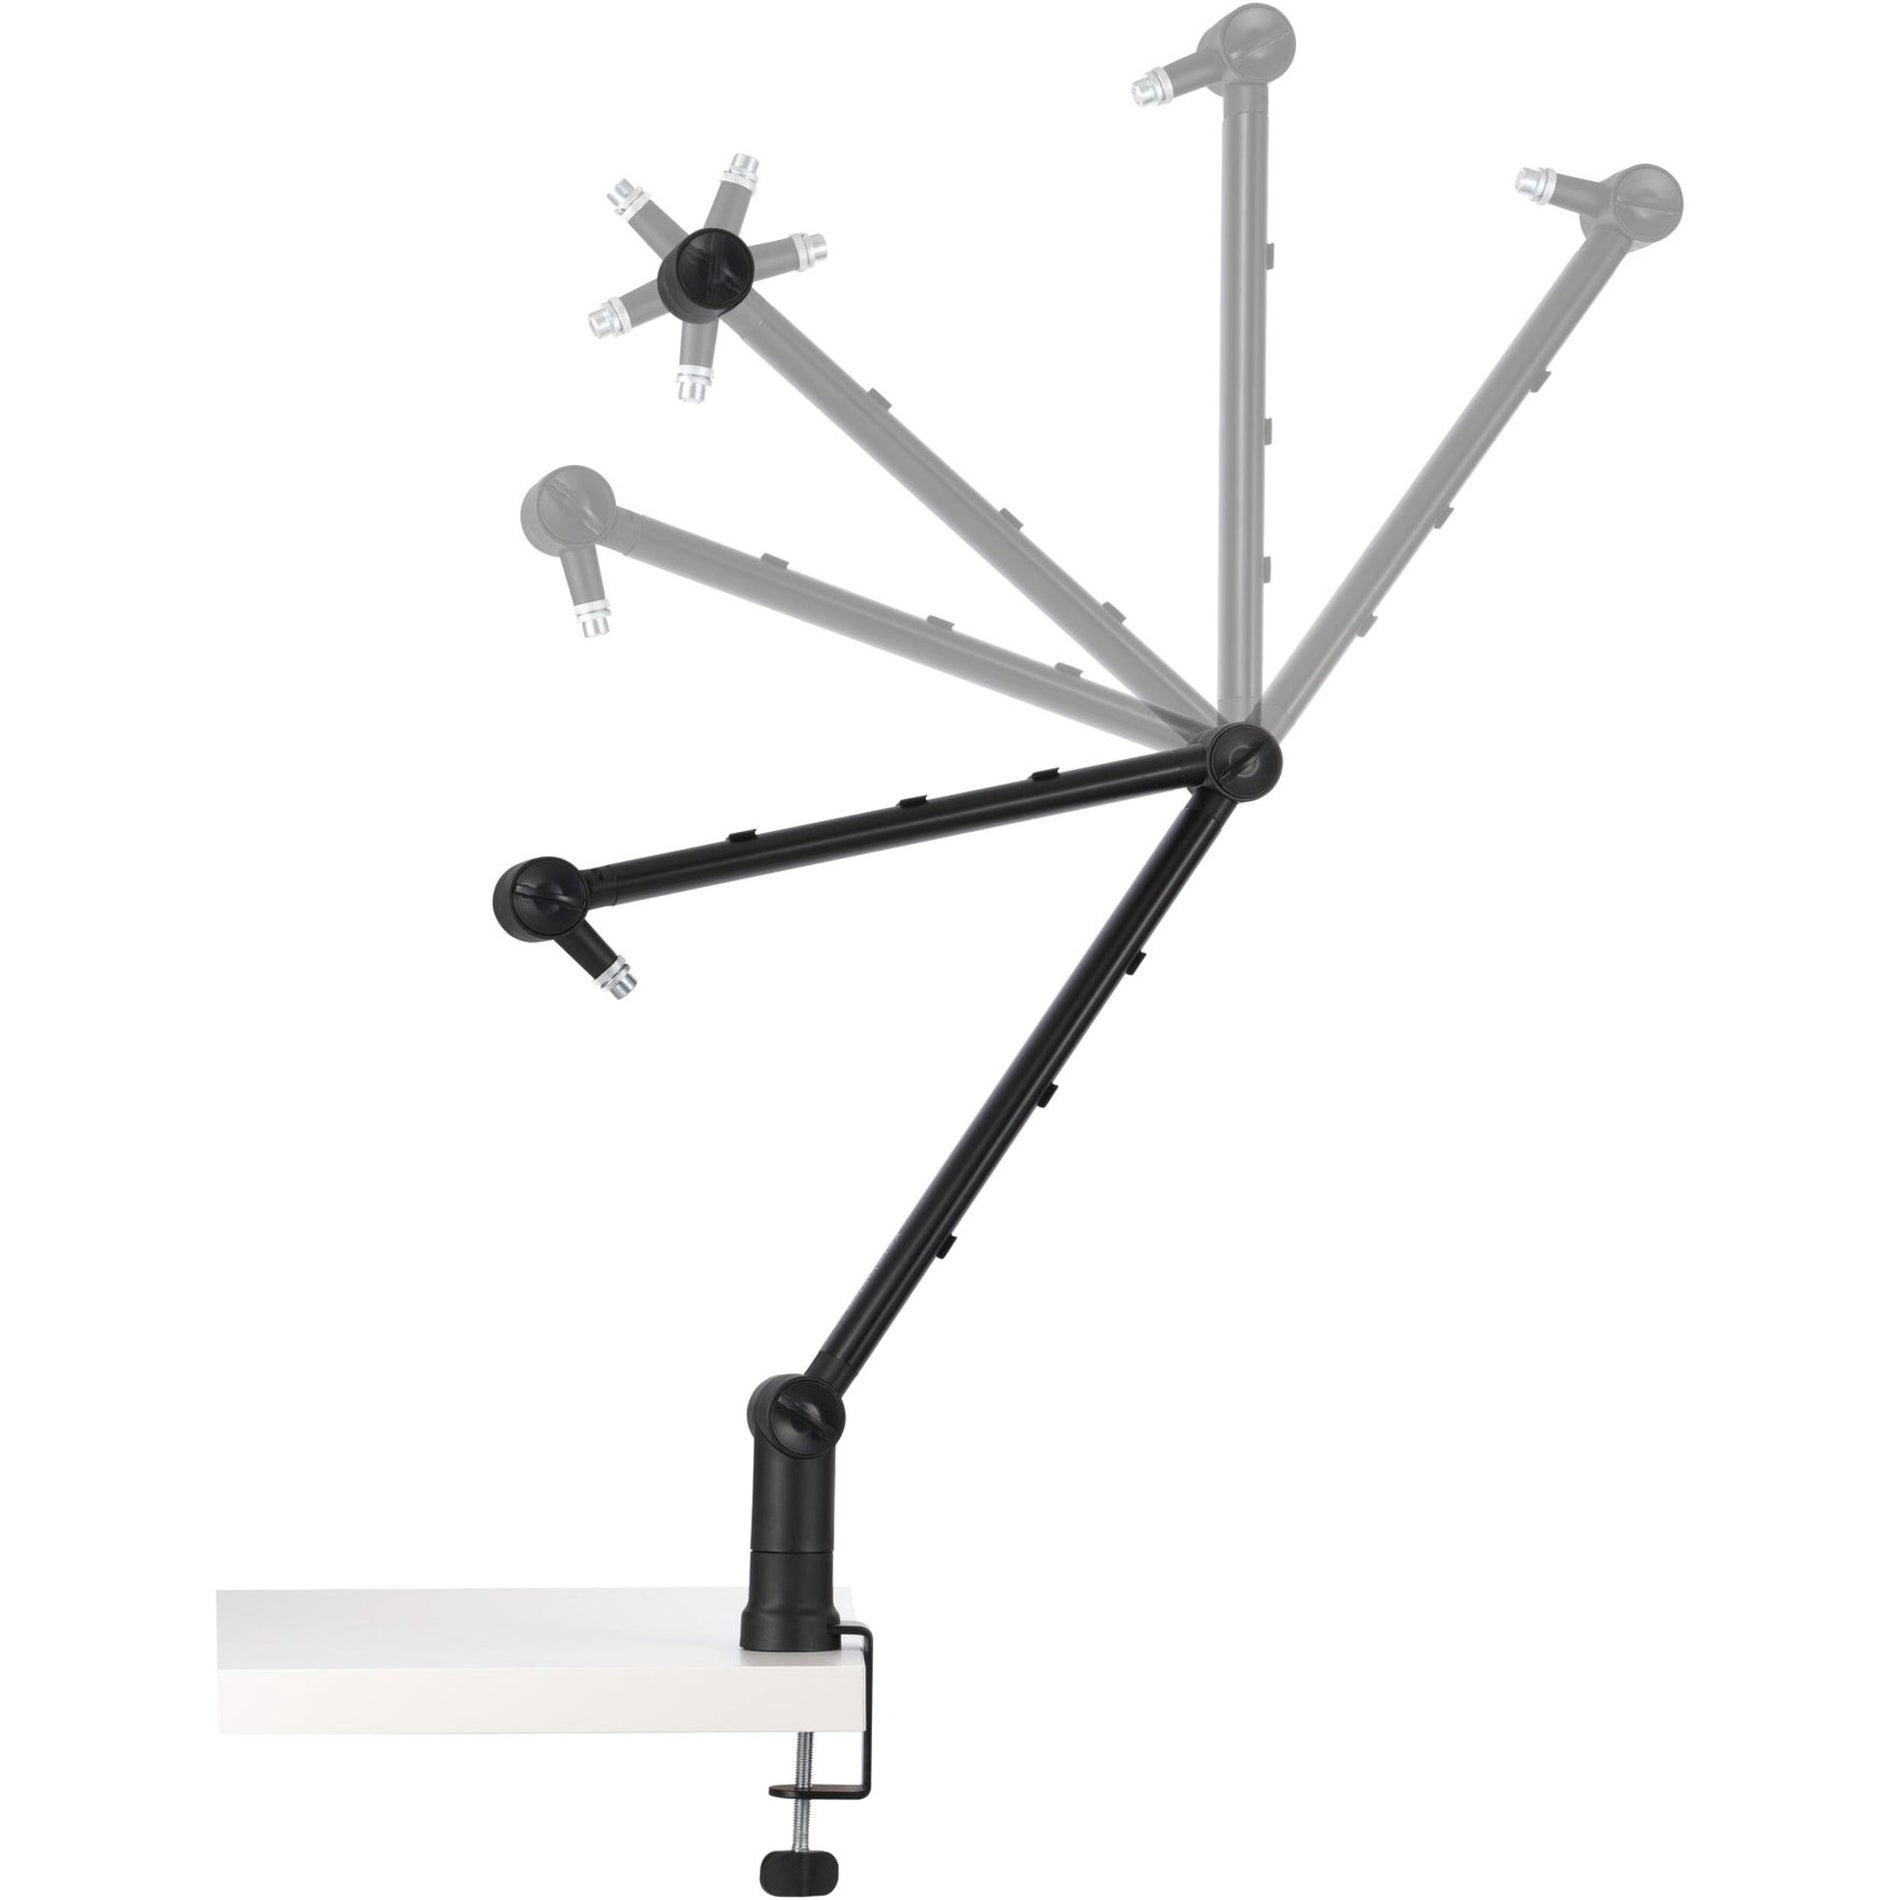 Kensington K87652WW A1020 Boom Arm for Microphones, Webcams, and Lighting Systems